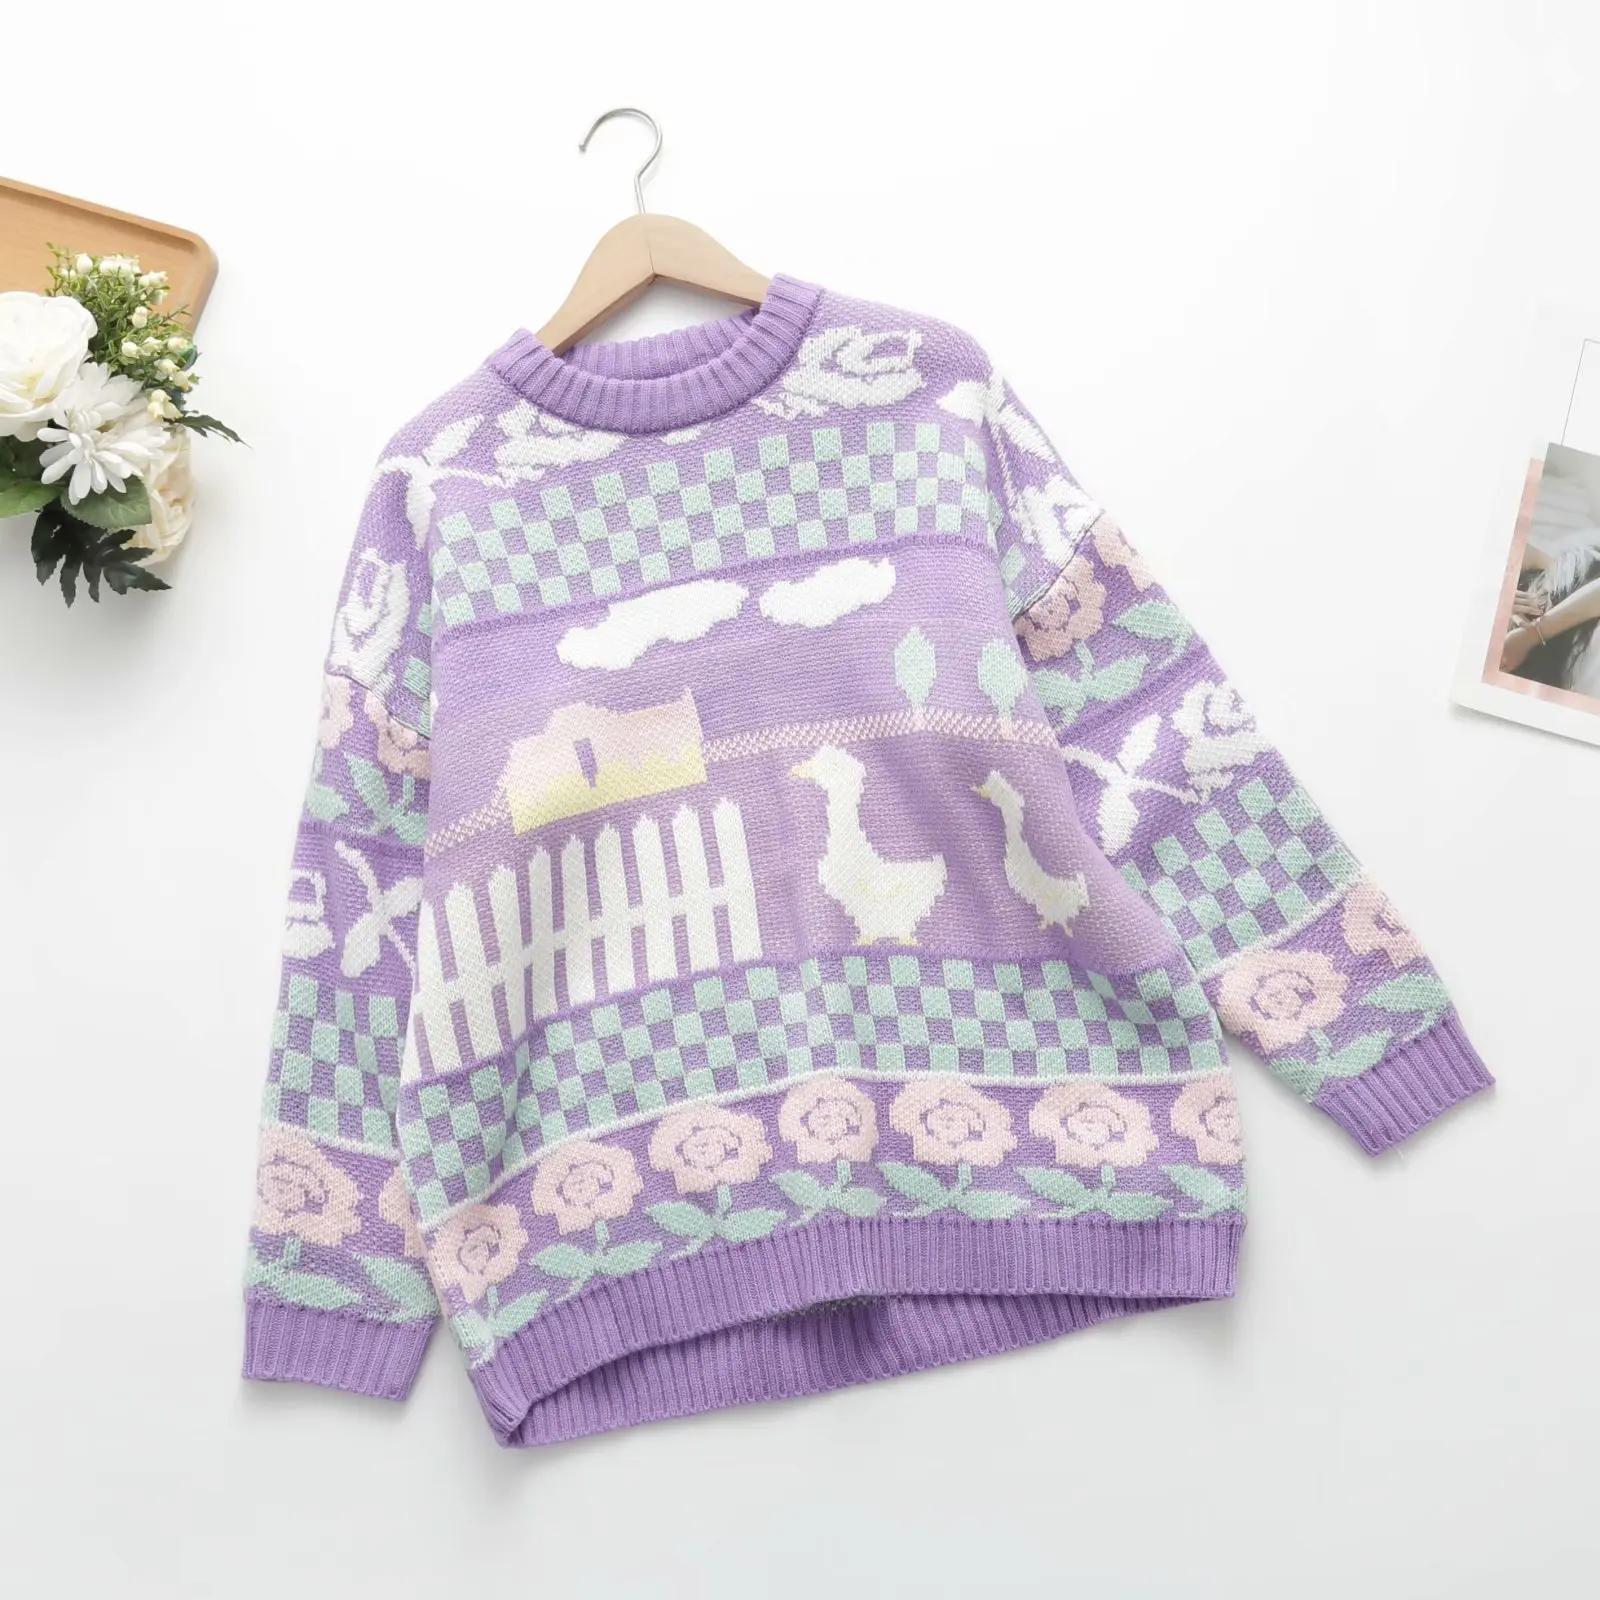 

Fairy Kei Pastel Duck Sweater Lilac 3/4 Sleeve Crew Neck Knit Pullover Jumper Soft Girl Aesthetic Harajuku Outfit